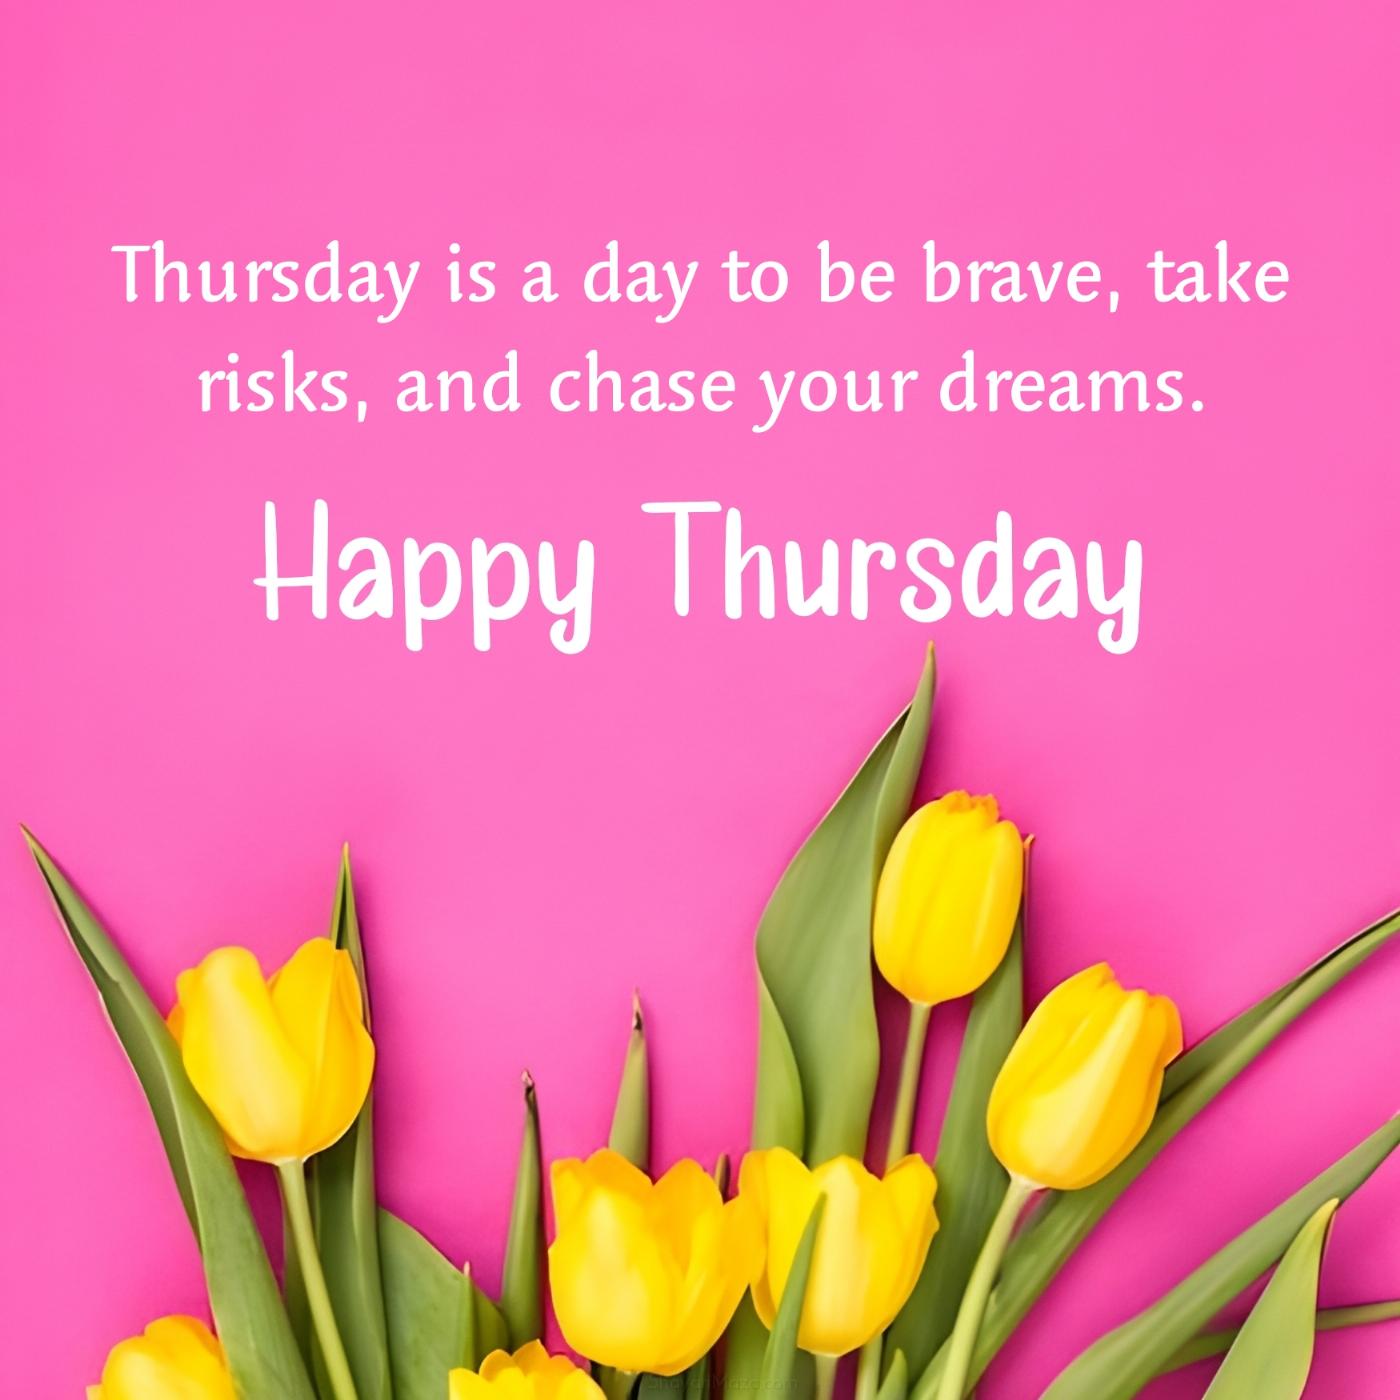 Thursday is a day to be brave take risks